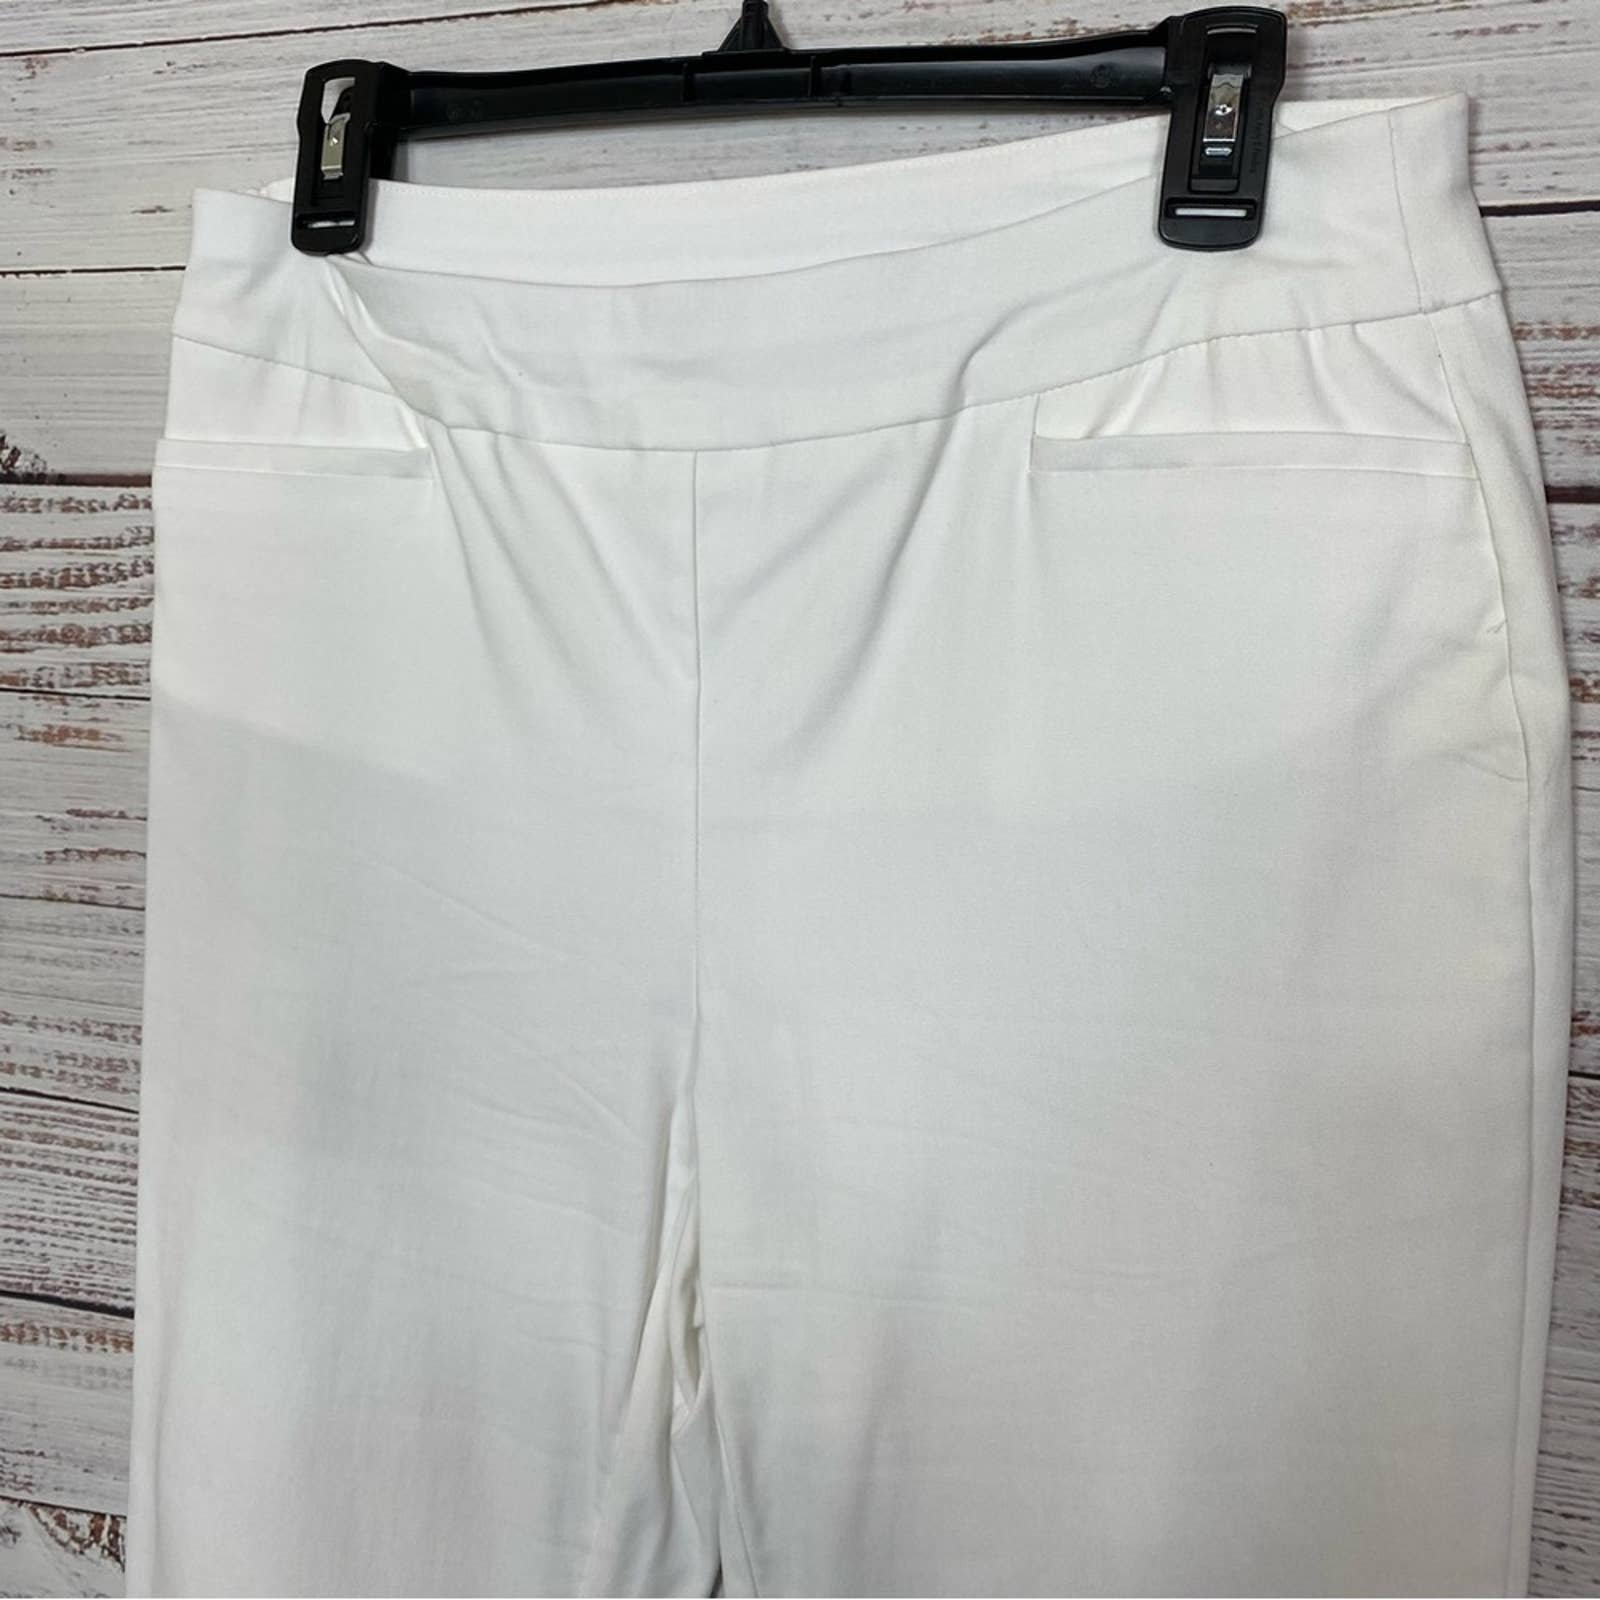 Wholesale price CHICO’S WHITE PULL ON RAYON ANKLE PANTS OyaAtOU4K New Style